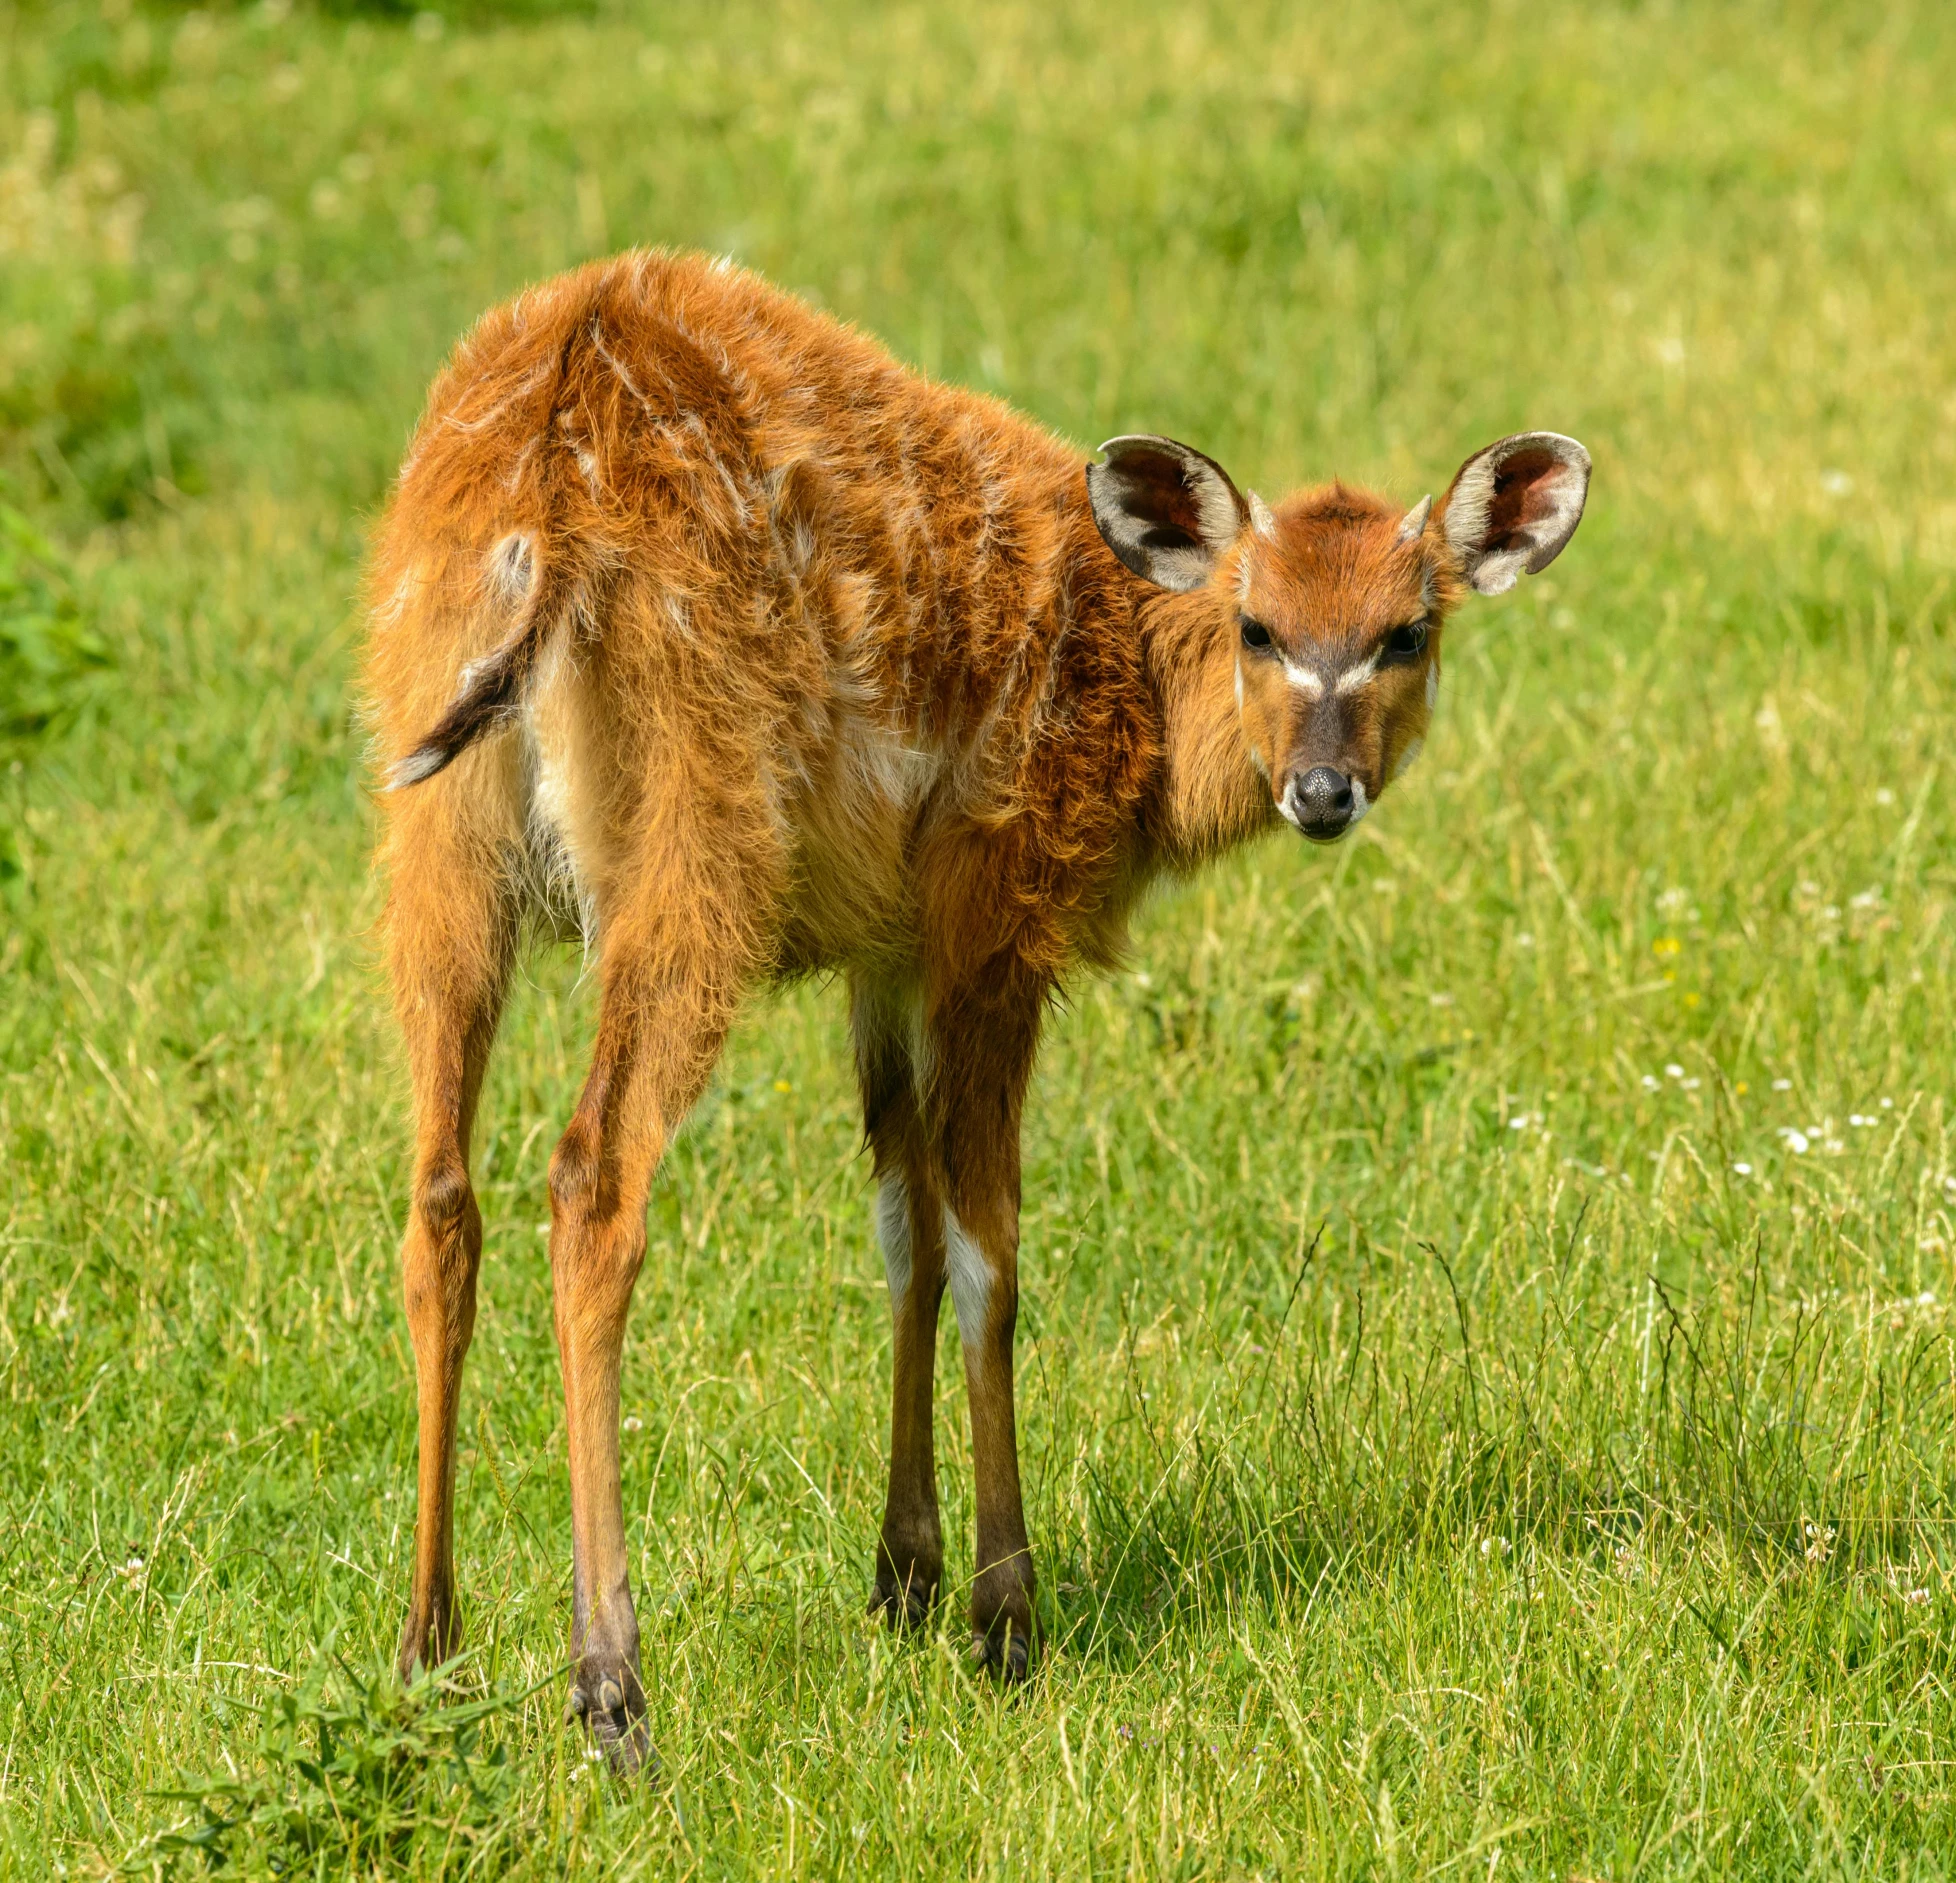 a young deer standing on top of a lush green field, mingei, orange fluffy belly, distant photo